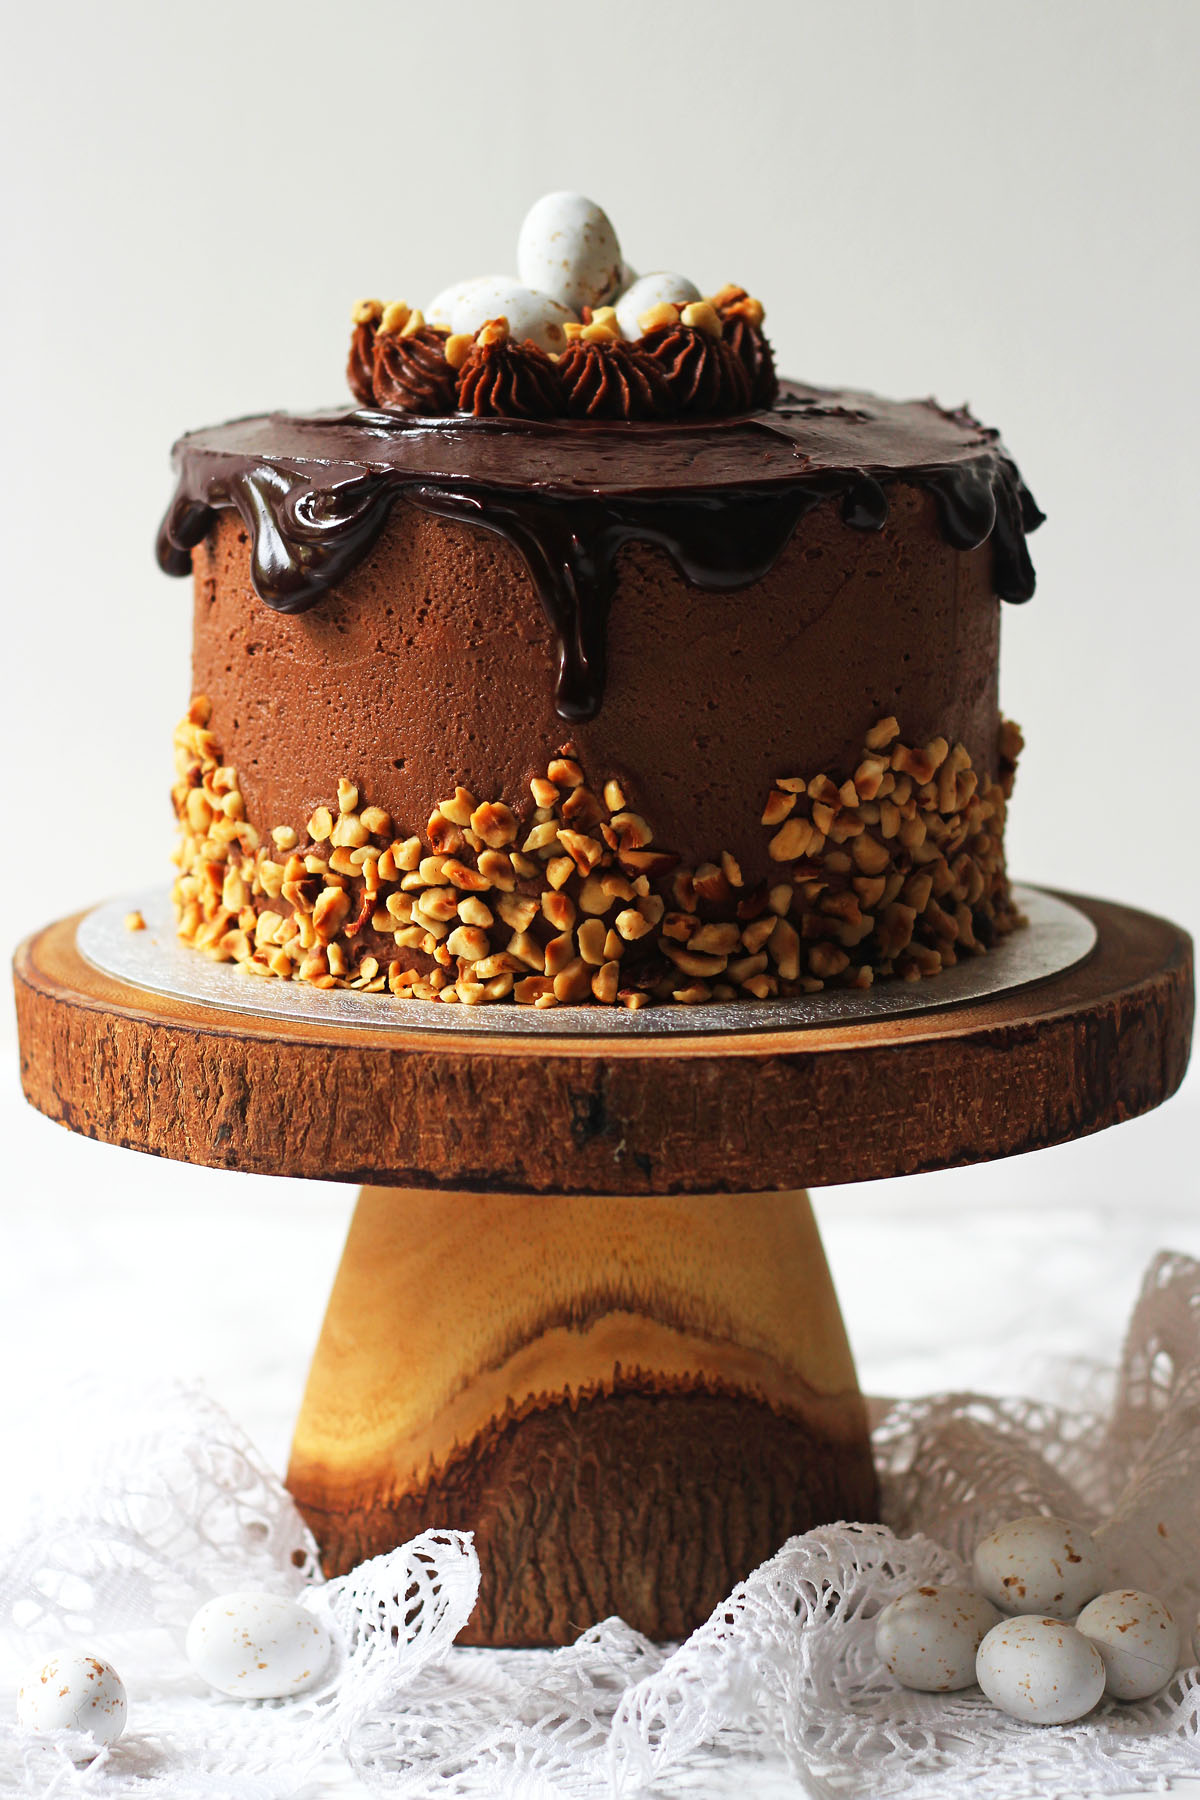 Nothing says Easter like a vanilla sponge cake smothered in Nutella buttercream, chopped hazelnuts, dark chocolate ganache, topped with praline Easter eggs! Get the recipe for this Praline Easter Cake at Supper in the Suburbs!